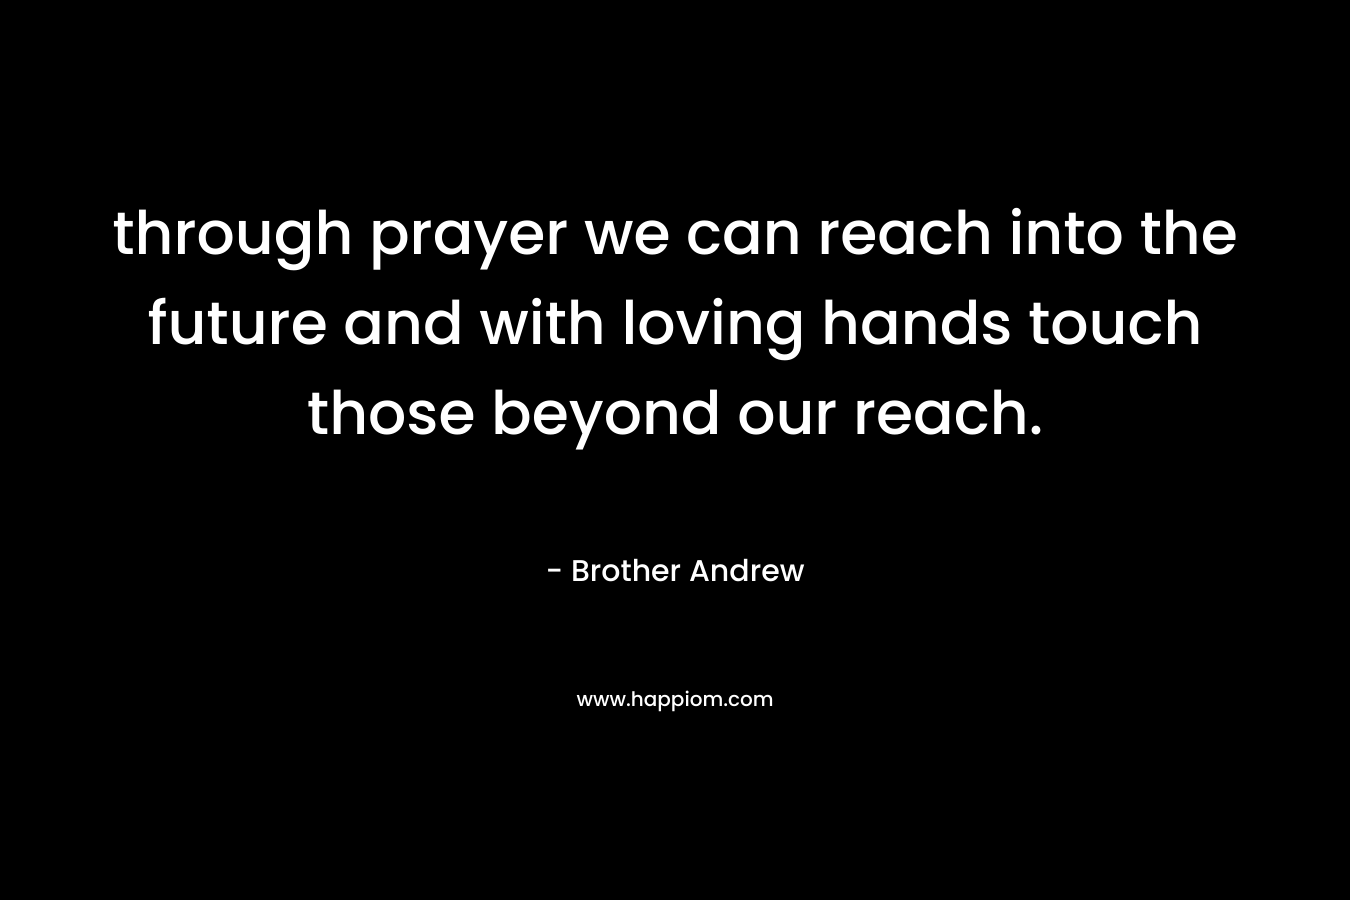 through prayer we can reach into the future and with loving hands touch those beyond our reach.